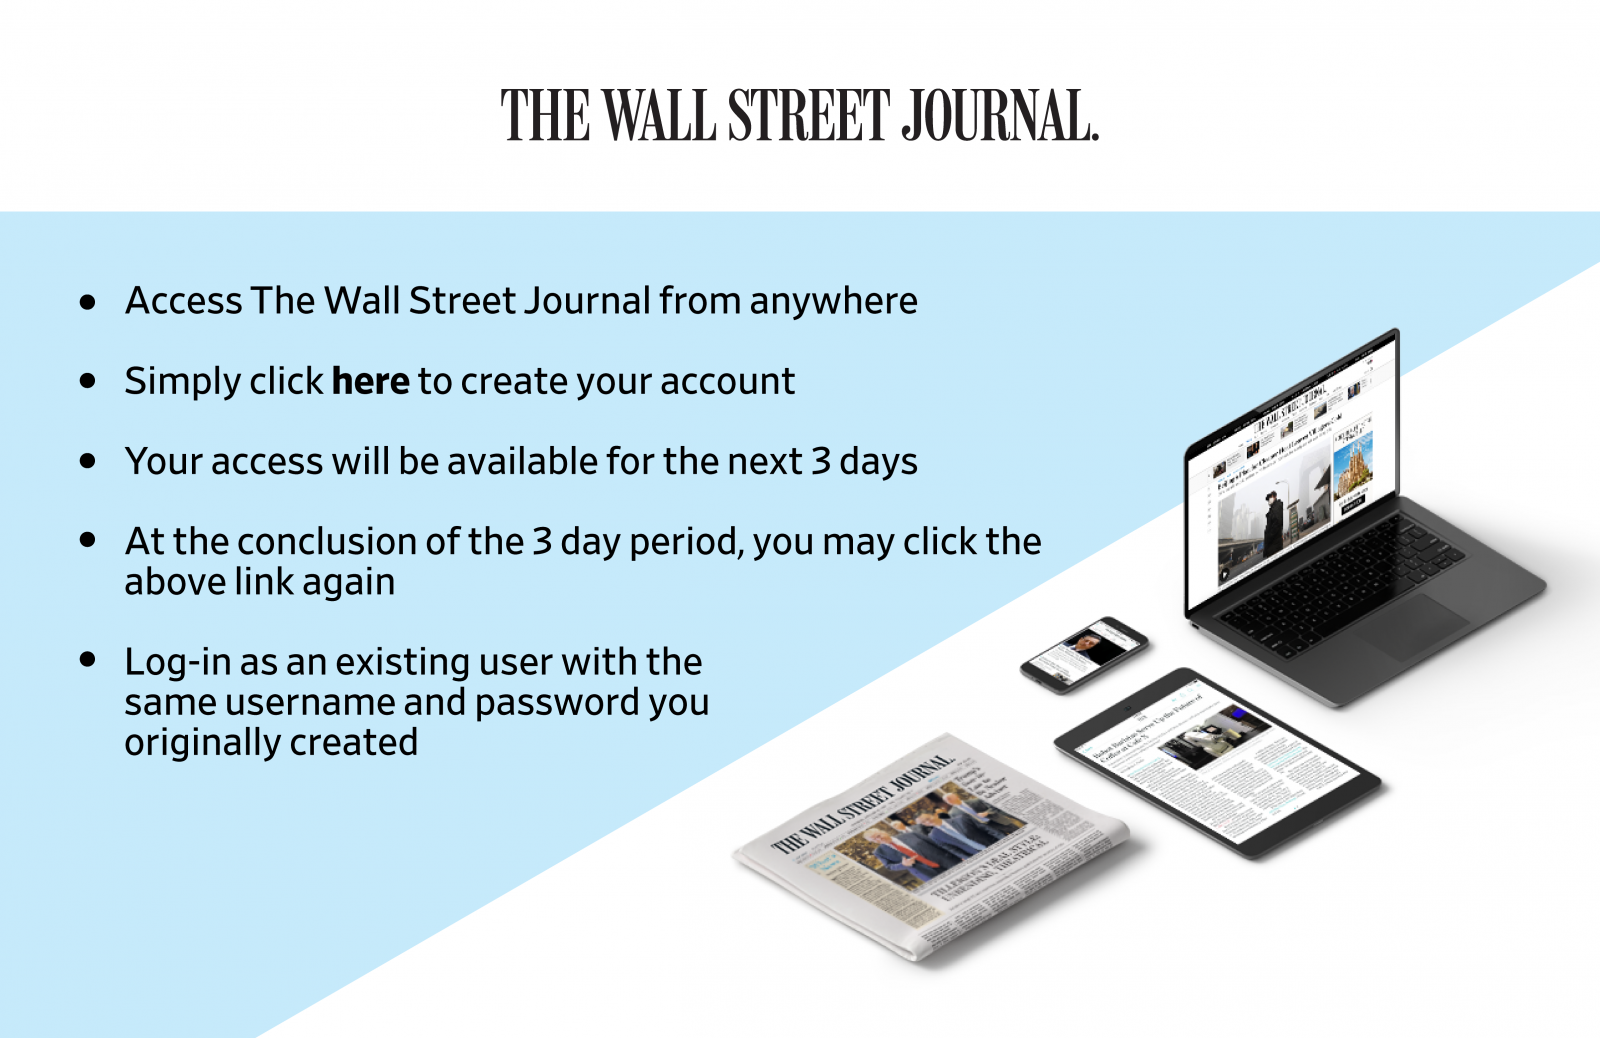 Access The Wall Street Journal from anywhere. Simply click here to create your account. Your access will be available for the next 3 days. At the conclusion of the 3 day period, you may click the above link again. Log in as an existing user with the same username and password you originally created